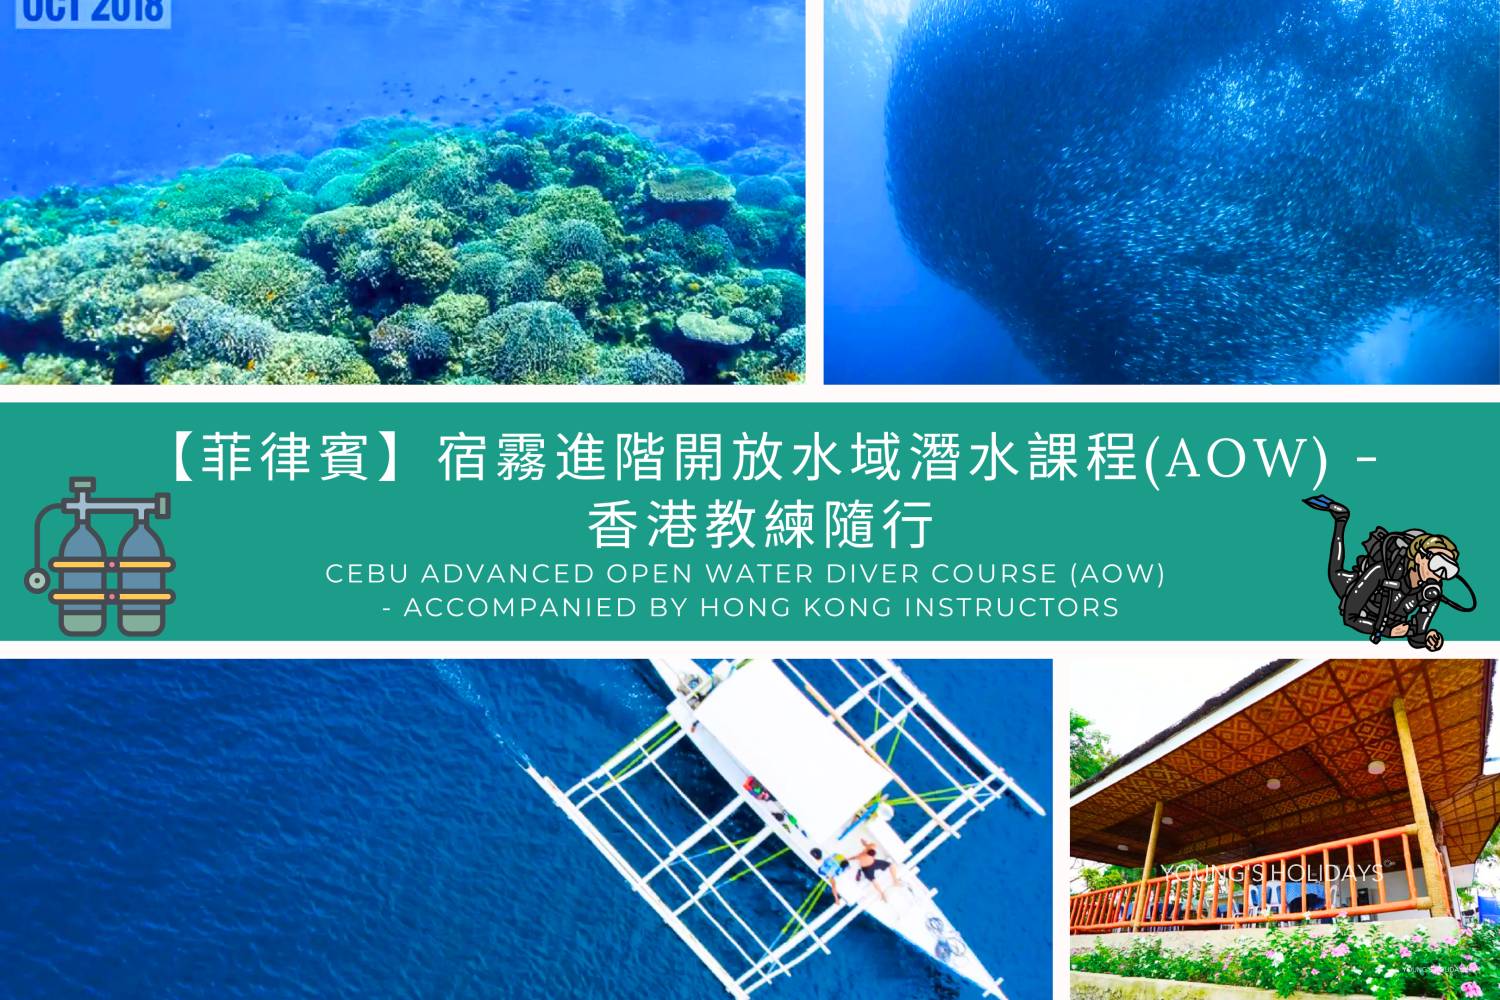 【Philippines】Cebu Advanced Open Water Diver Course (AOW) - accompanied by Hong Kong instructors